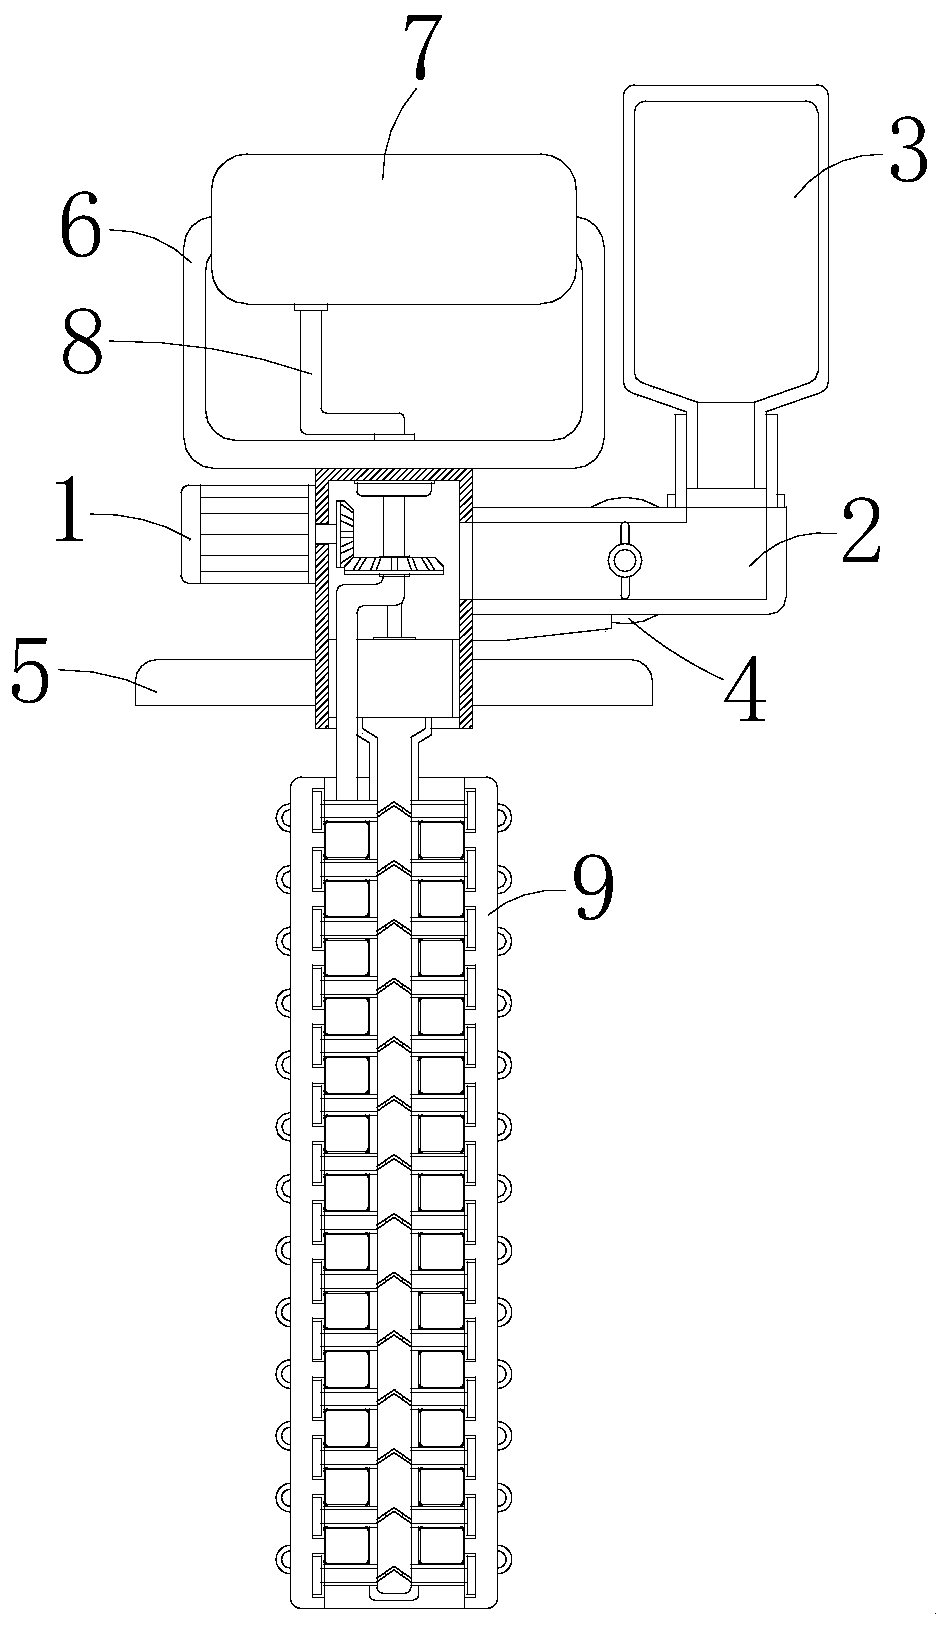 Fuel cylinder block cleaning device